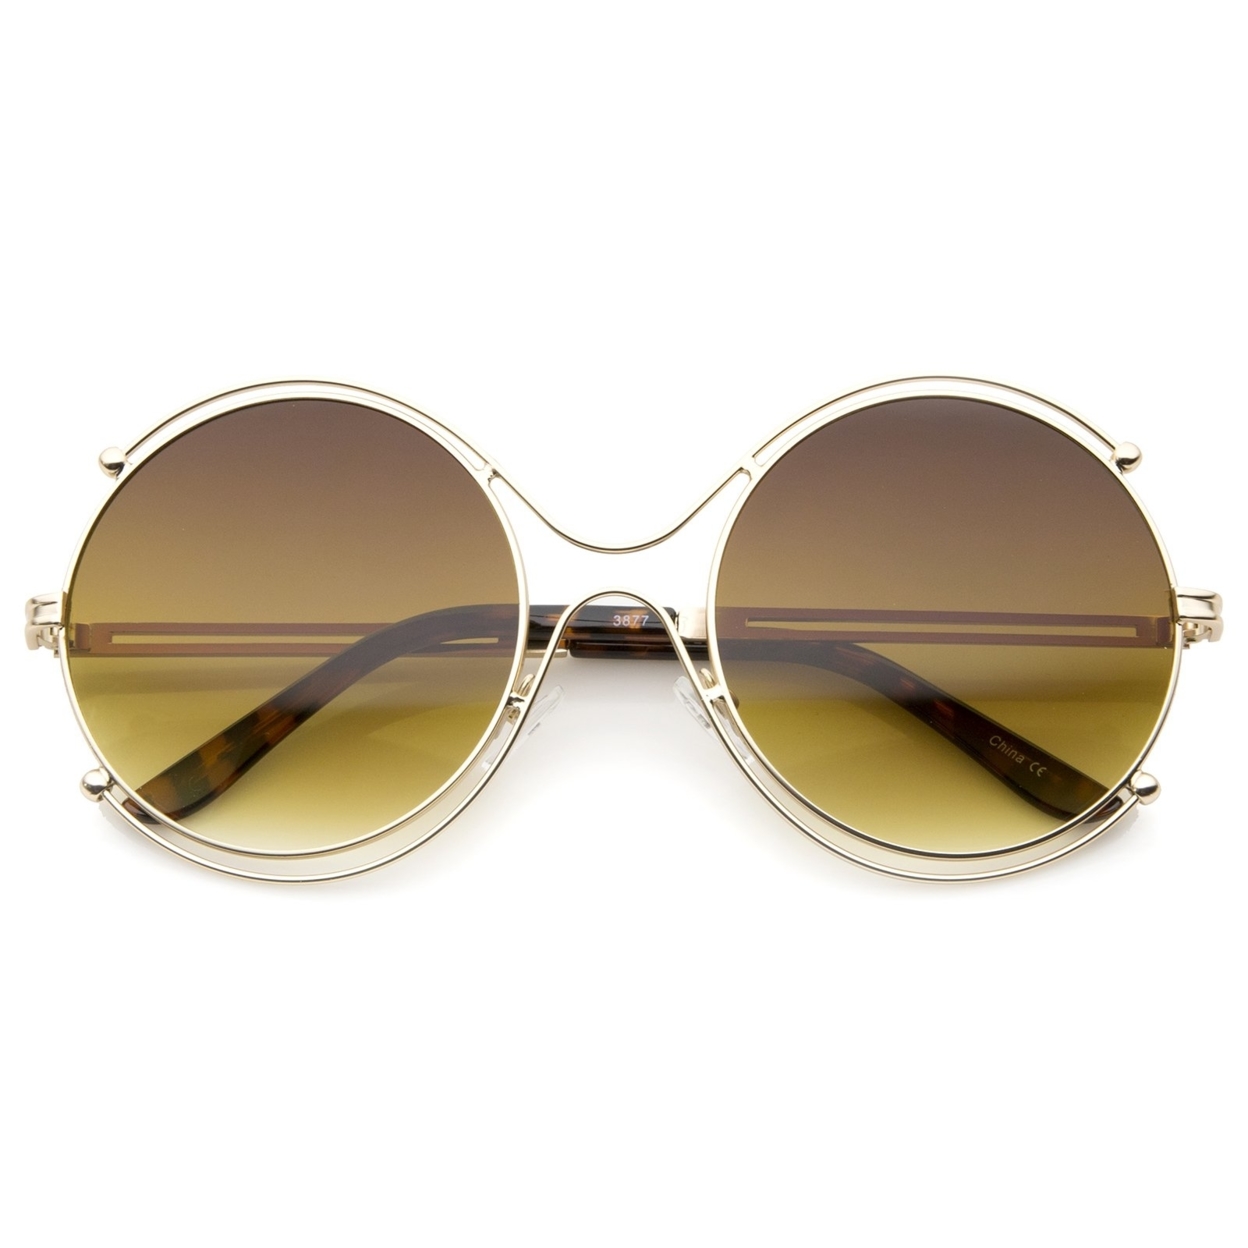 Women's Fashion Wire Rimmed Temple Cutout Round Oversized Sunglasses 58mm - Gold / Green-Amber Fade